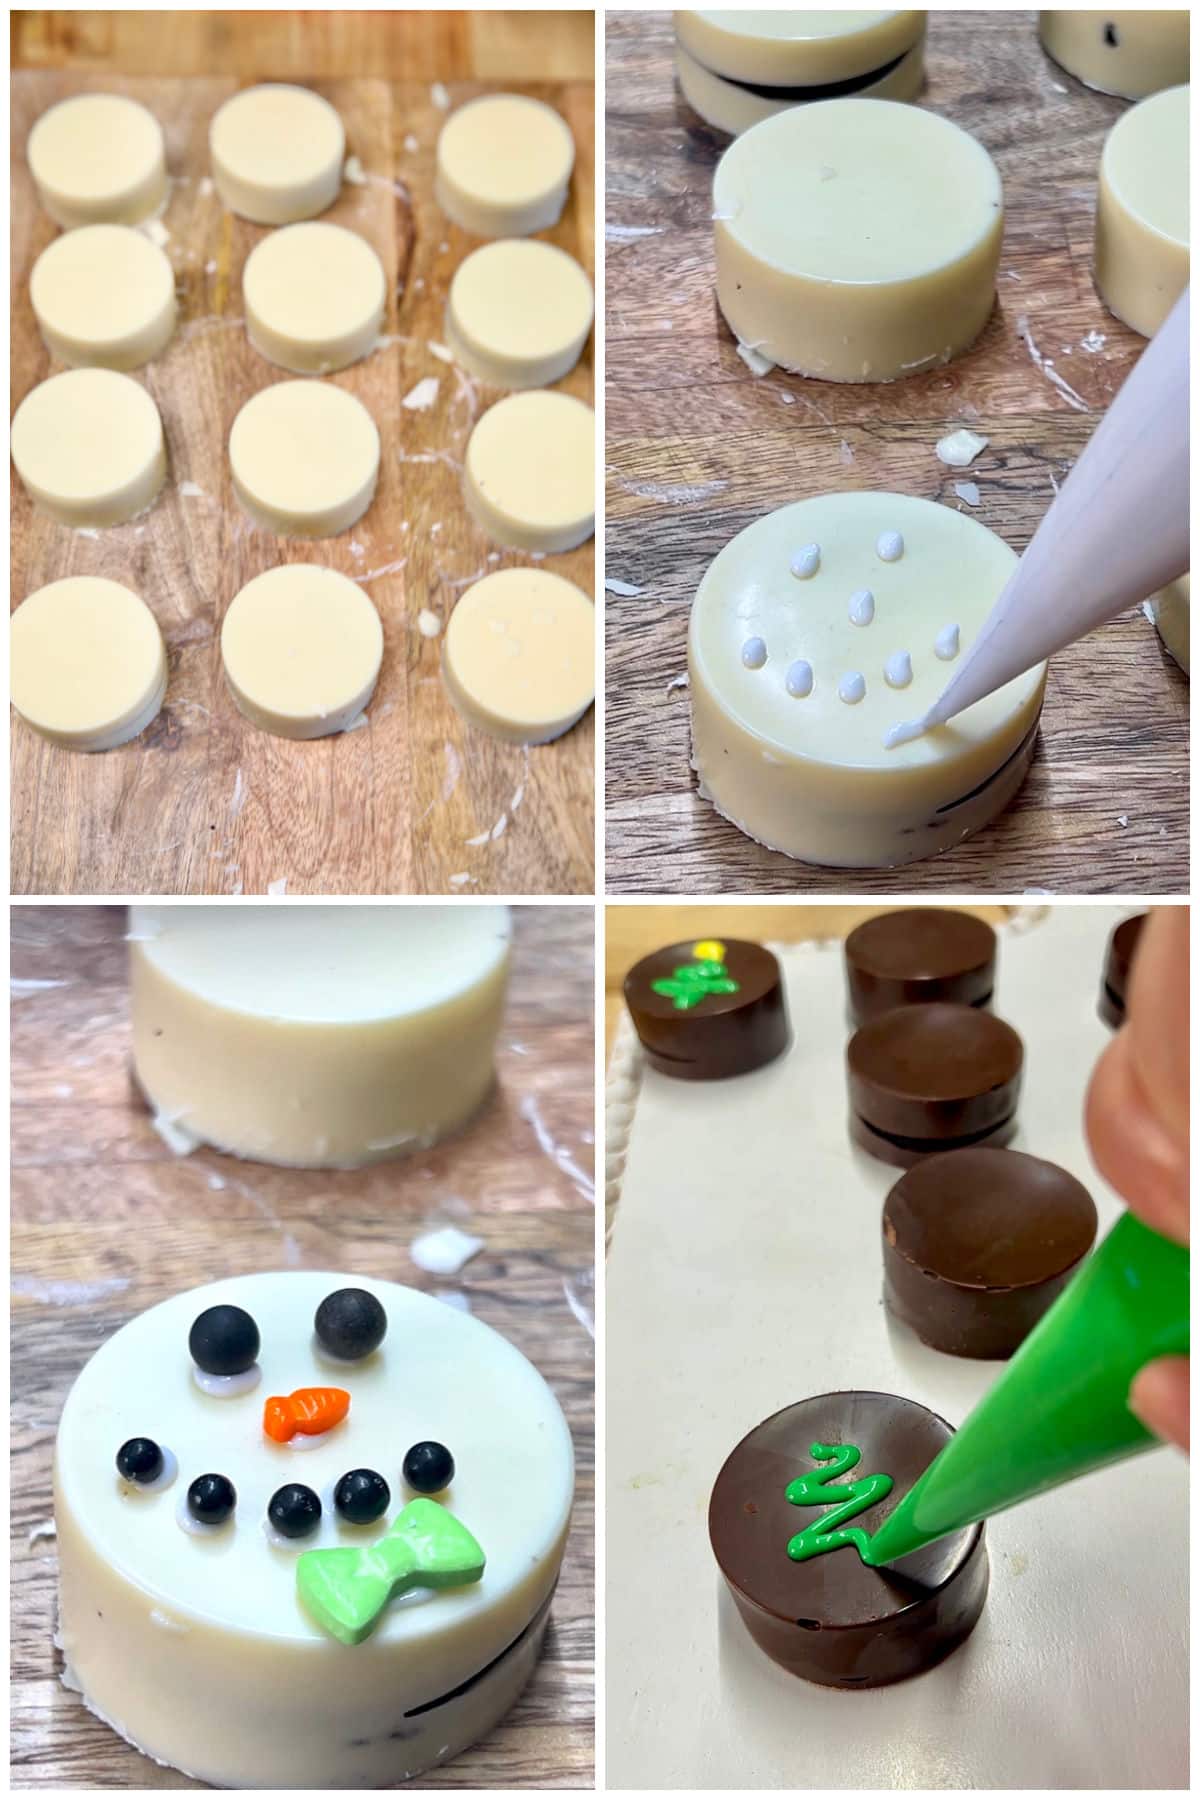 Decorating Dipped Oreo cookies.